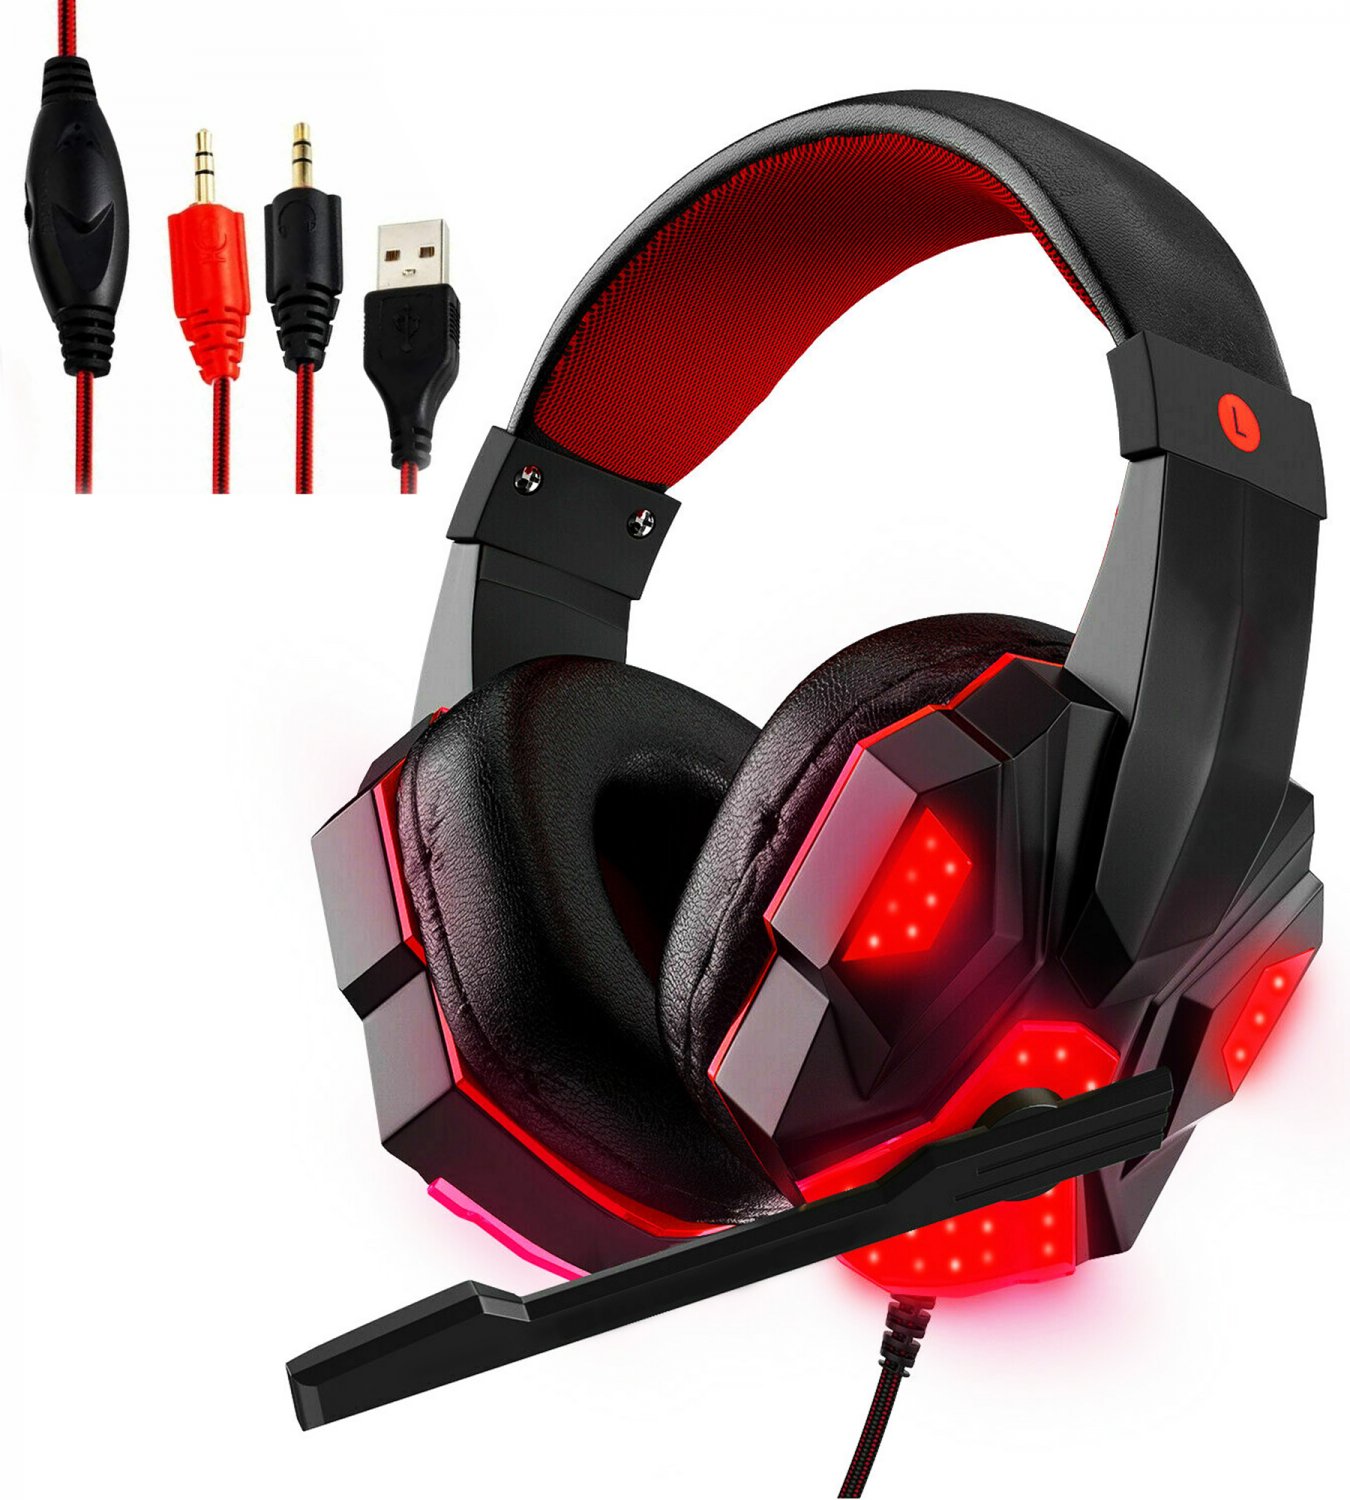 Esports Gaming Headset 3.5 mm Wired Stereo Over-ear Pro LED 3D Sound PC Xbox PS4 HDP GM1 R